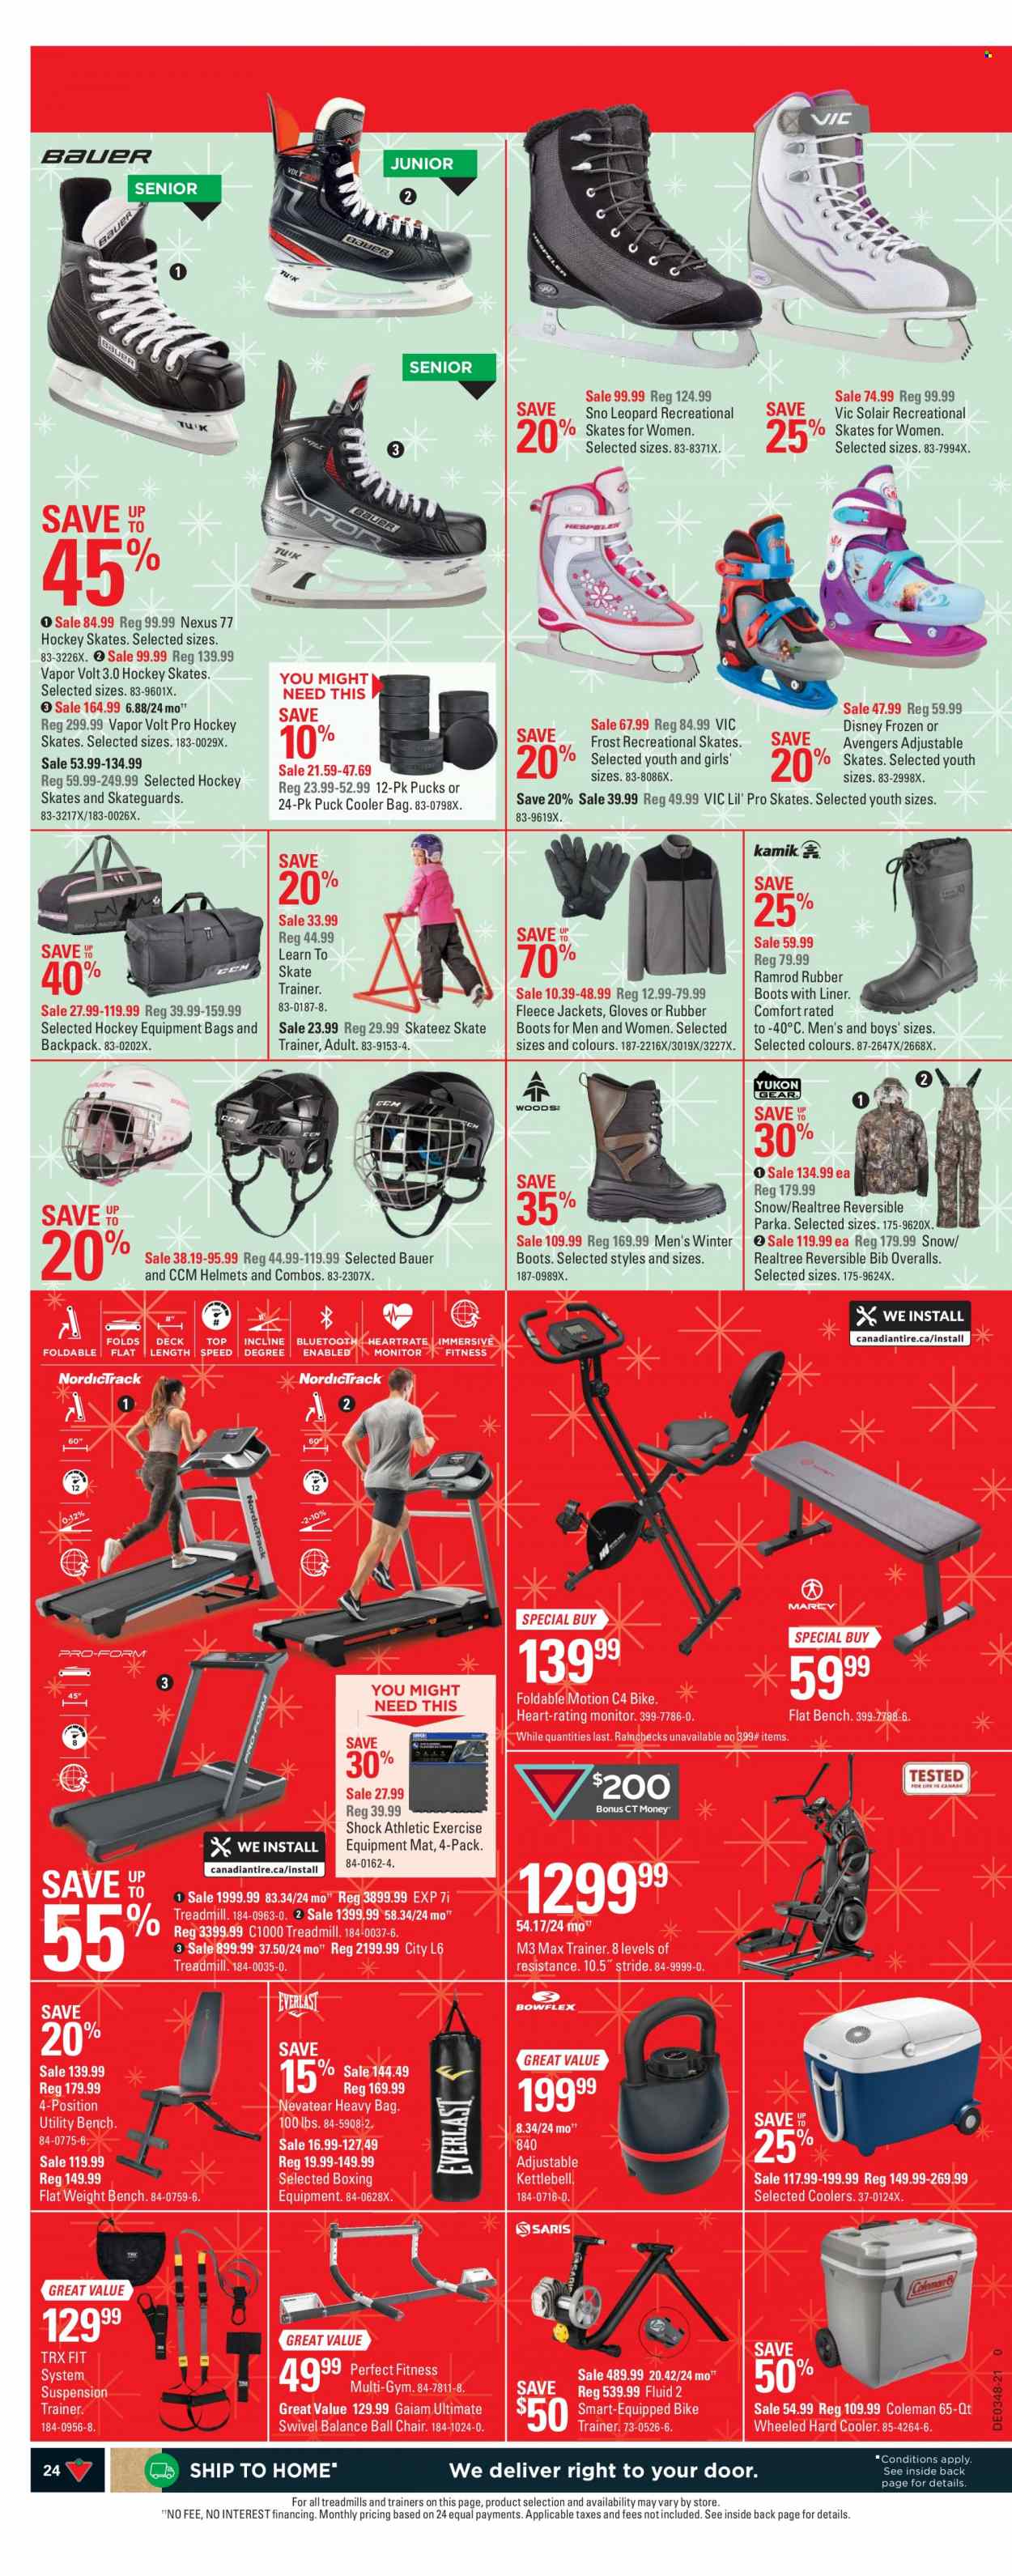 thumbnail - Canadian Tire Flyer - November 25, 2021 - December 01, 2021 - Sales products - Disney, Avengers, bag, gloves, cooler bag, eraser, chair, bench, ball chair, boots, winter boots, trainers, Coleman, treadmill, heavy bag, kettlebell, weights set, hockey skates, skates, bib, rubber boots, parka. Page 24.